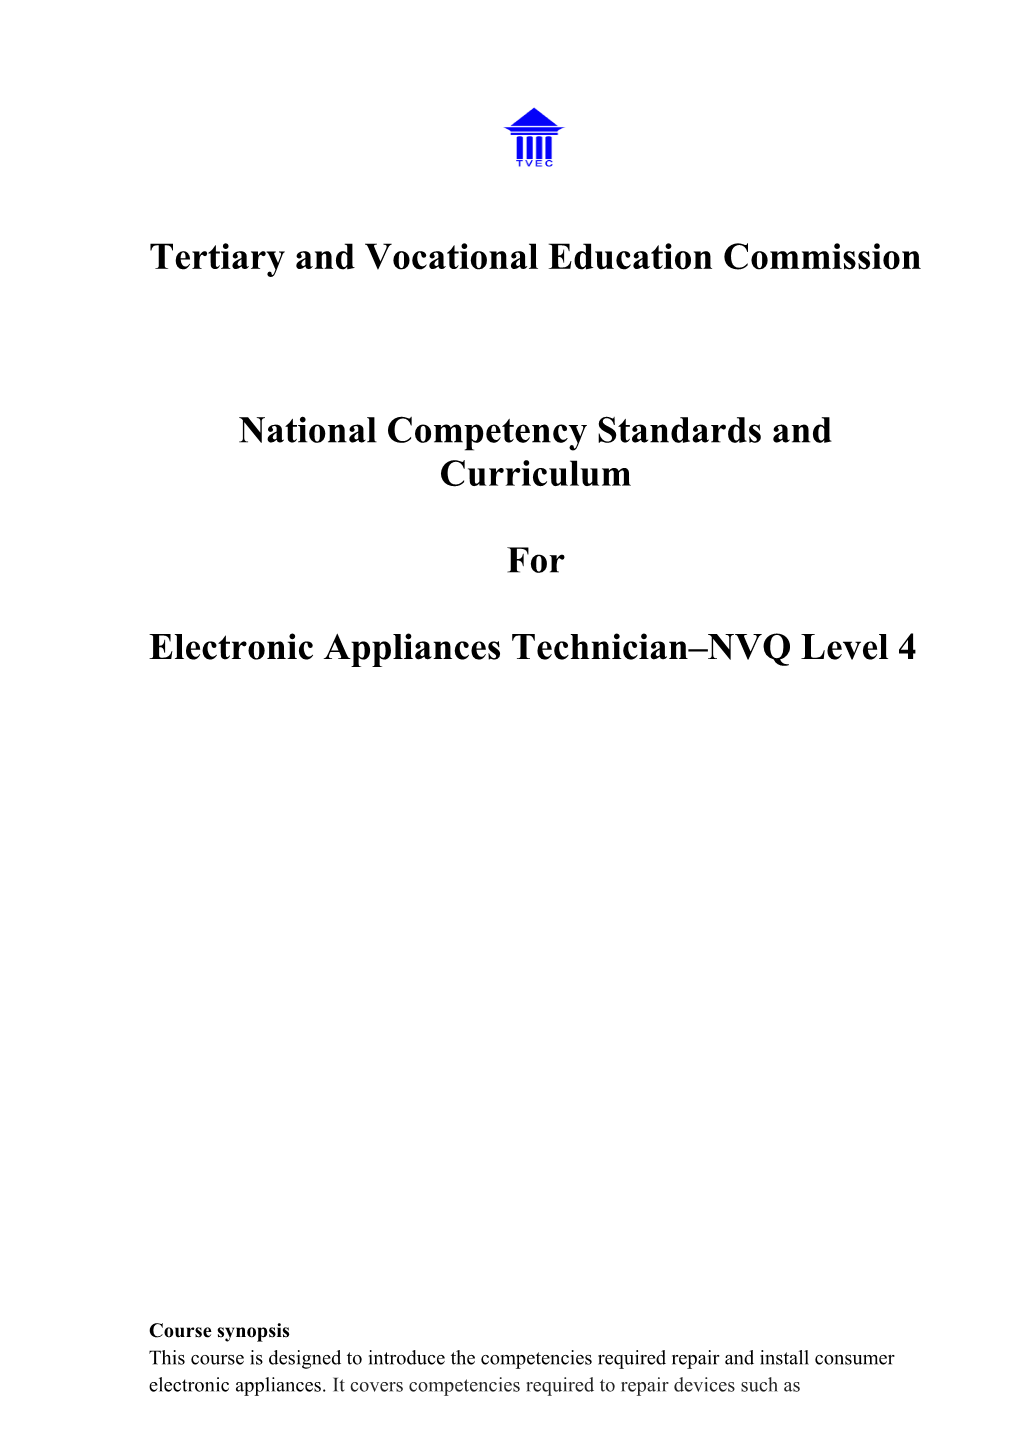 National Competency Standards and Curriculum